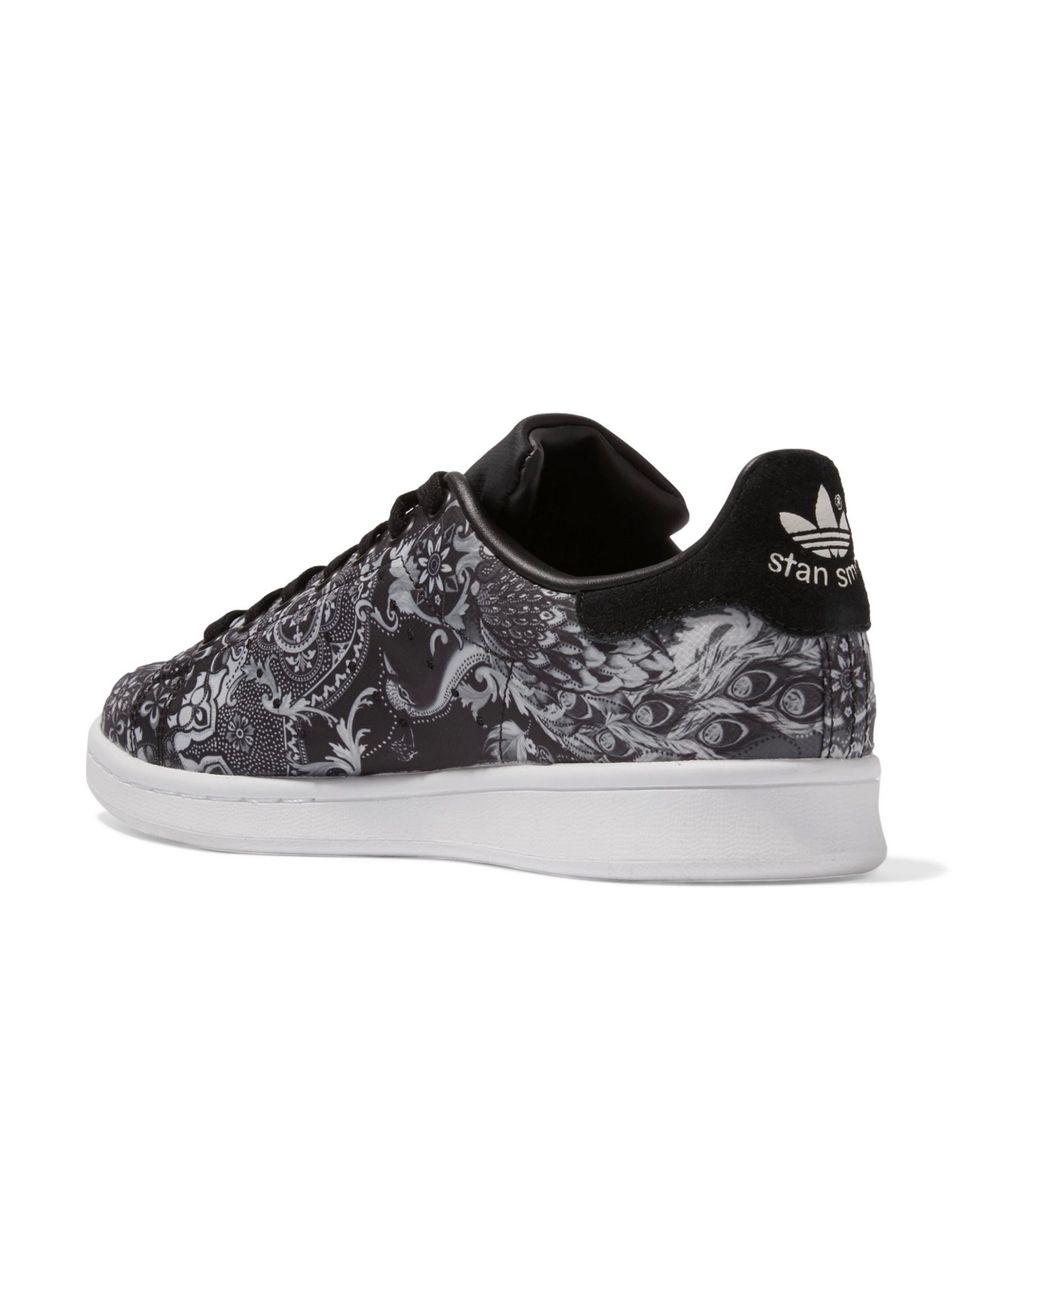 adidas Originals Stan Smith Paisley-print Shell Sneakers in Black | Lyst UK